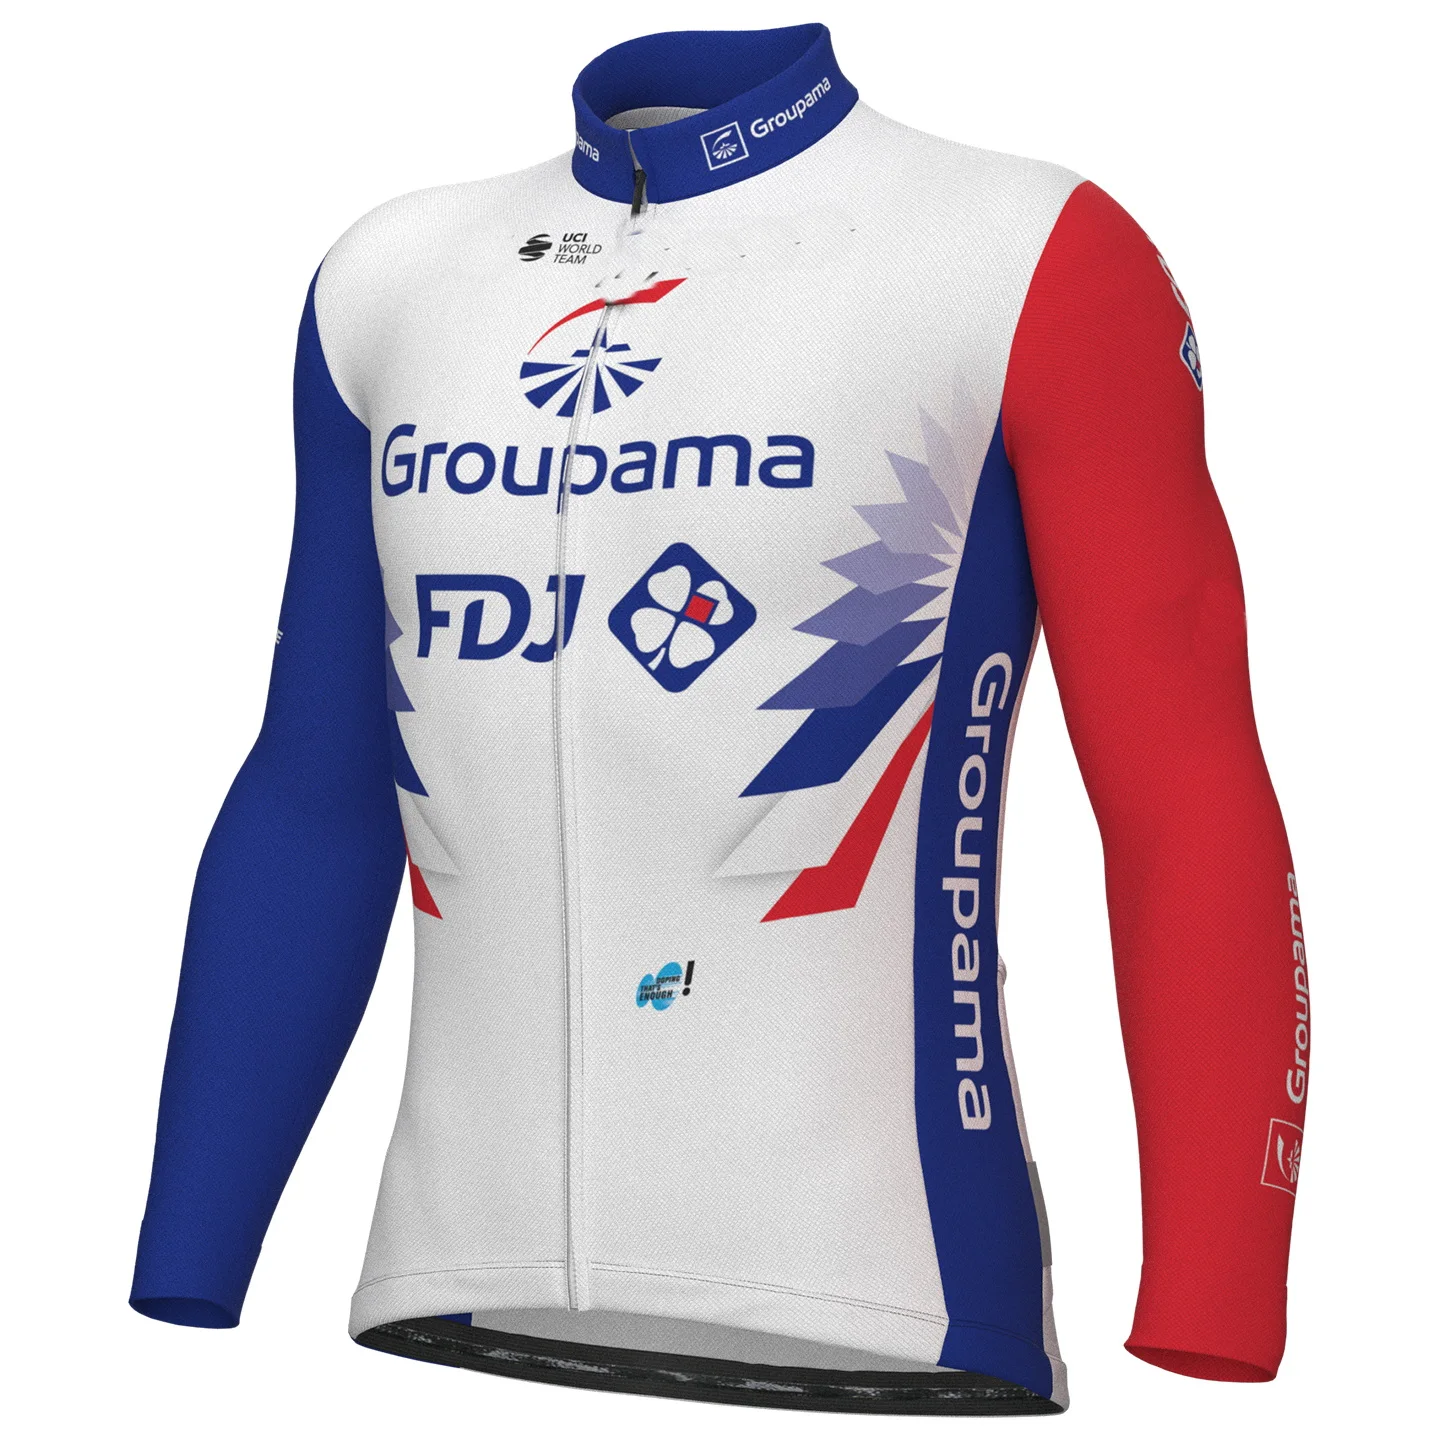 

WINTER FLEECE THERMAL 2022 2021 GROUPAMA FDJ TEAM BLUE ONLY LONG SLEEVE CYCLING JERSEY CYCLING WEAR ROPA CICLISMO SIZE XS-4XL